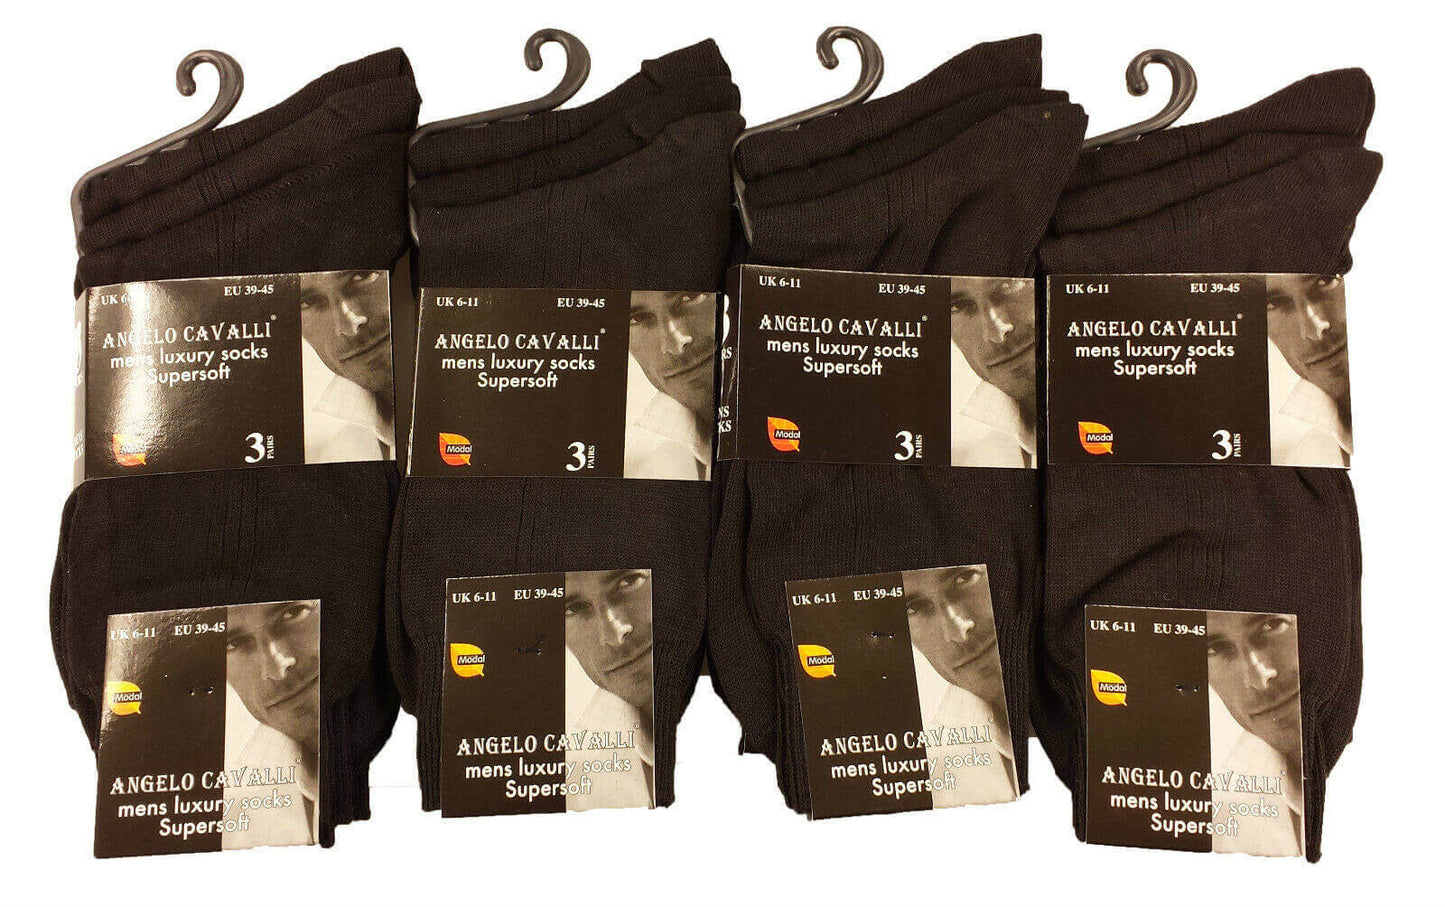 6 Pairs Men's Luxury Super Soft Socks, Extra Fine Cotton Modal Socks. Buy now for £7.00. A Socks by Sock Stack. 6-11, assorted, black, boot, boys, breathable, brown, comfortable, cotton, dark assorted, dress socks, dressing, formal wear, hiking, light ass